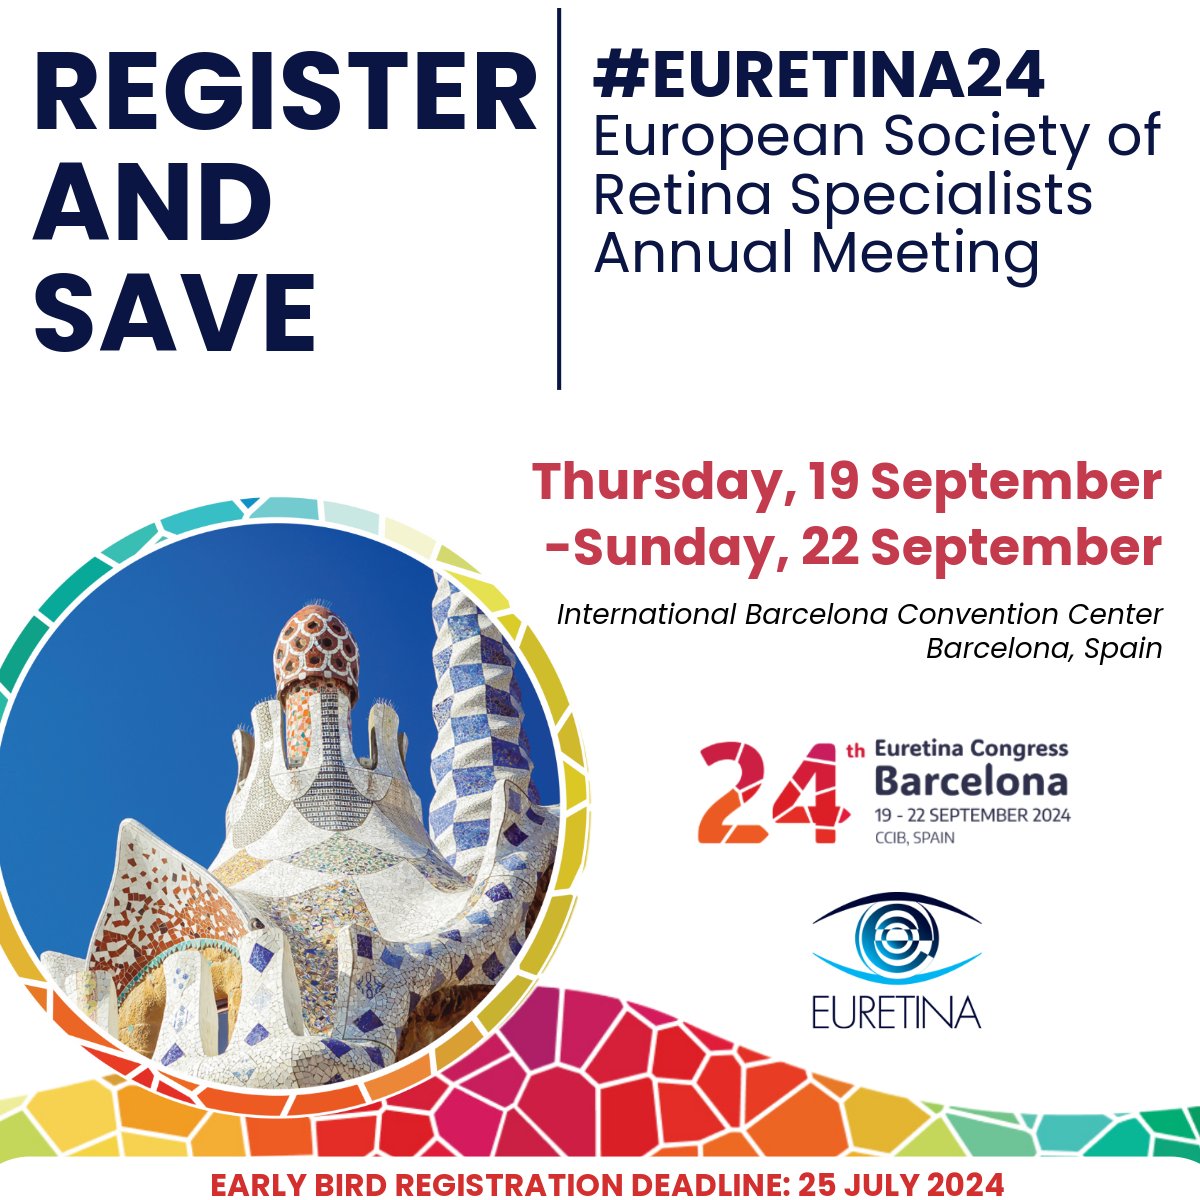 🌟 Excited for #EURETINA24? Don't miss out on our annual meeting this September! Attend an unforgettable event of ophthalmology experts to learn about the latest advances, have stimulating discussions, and network. Register now: ow.ly/tv6A50RB6rh